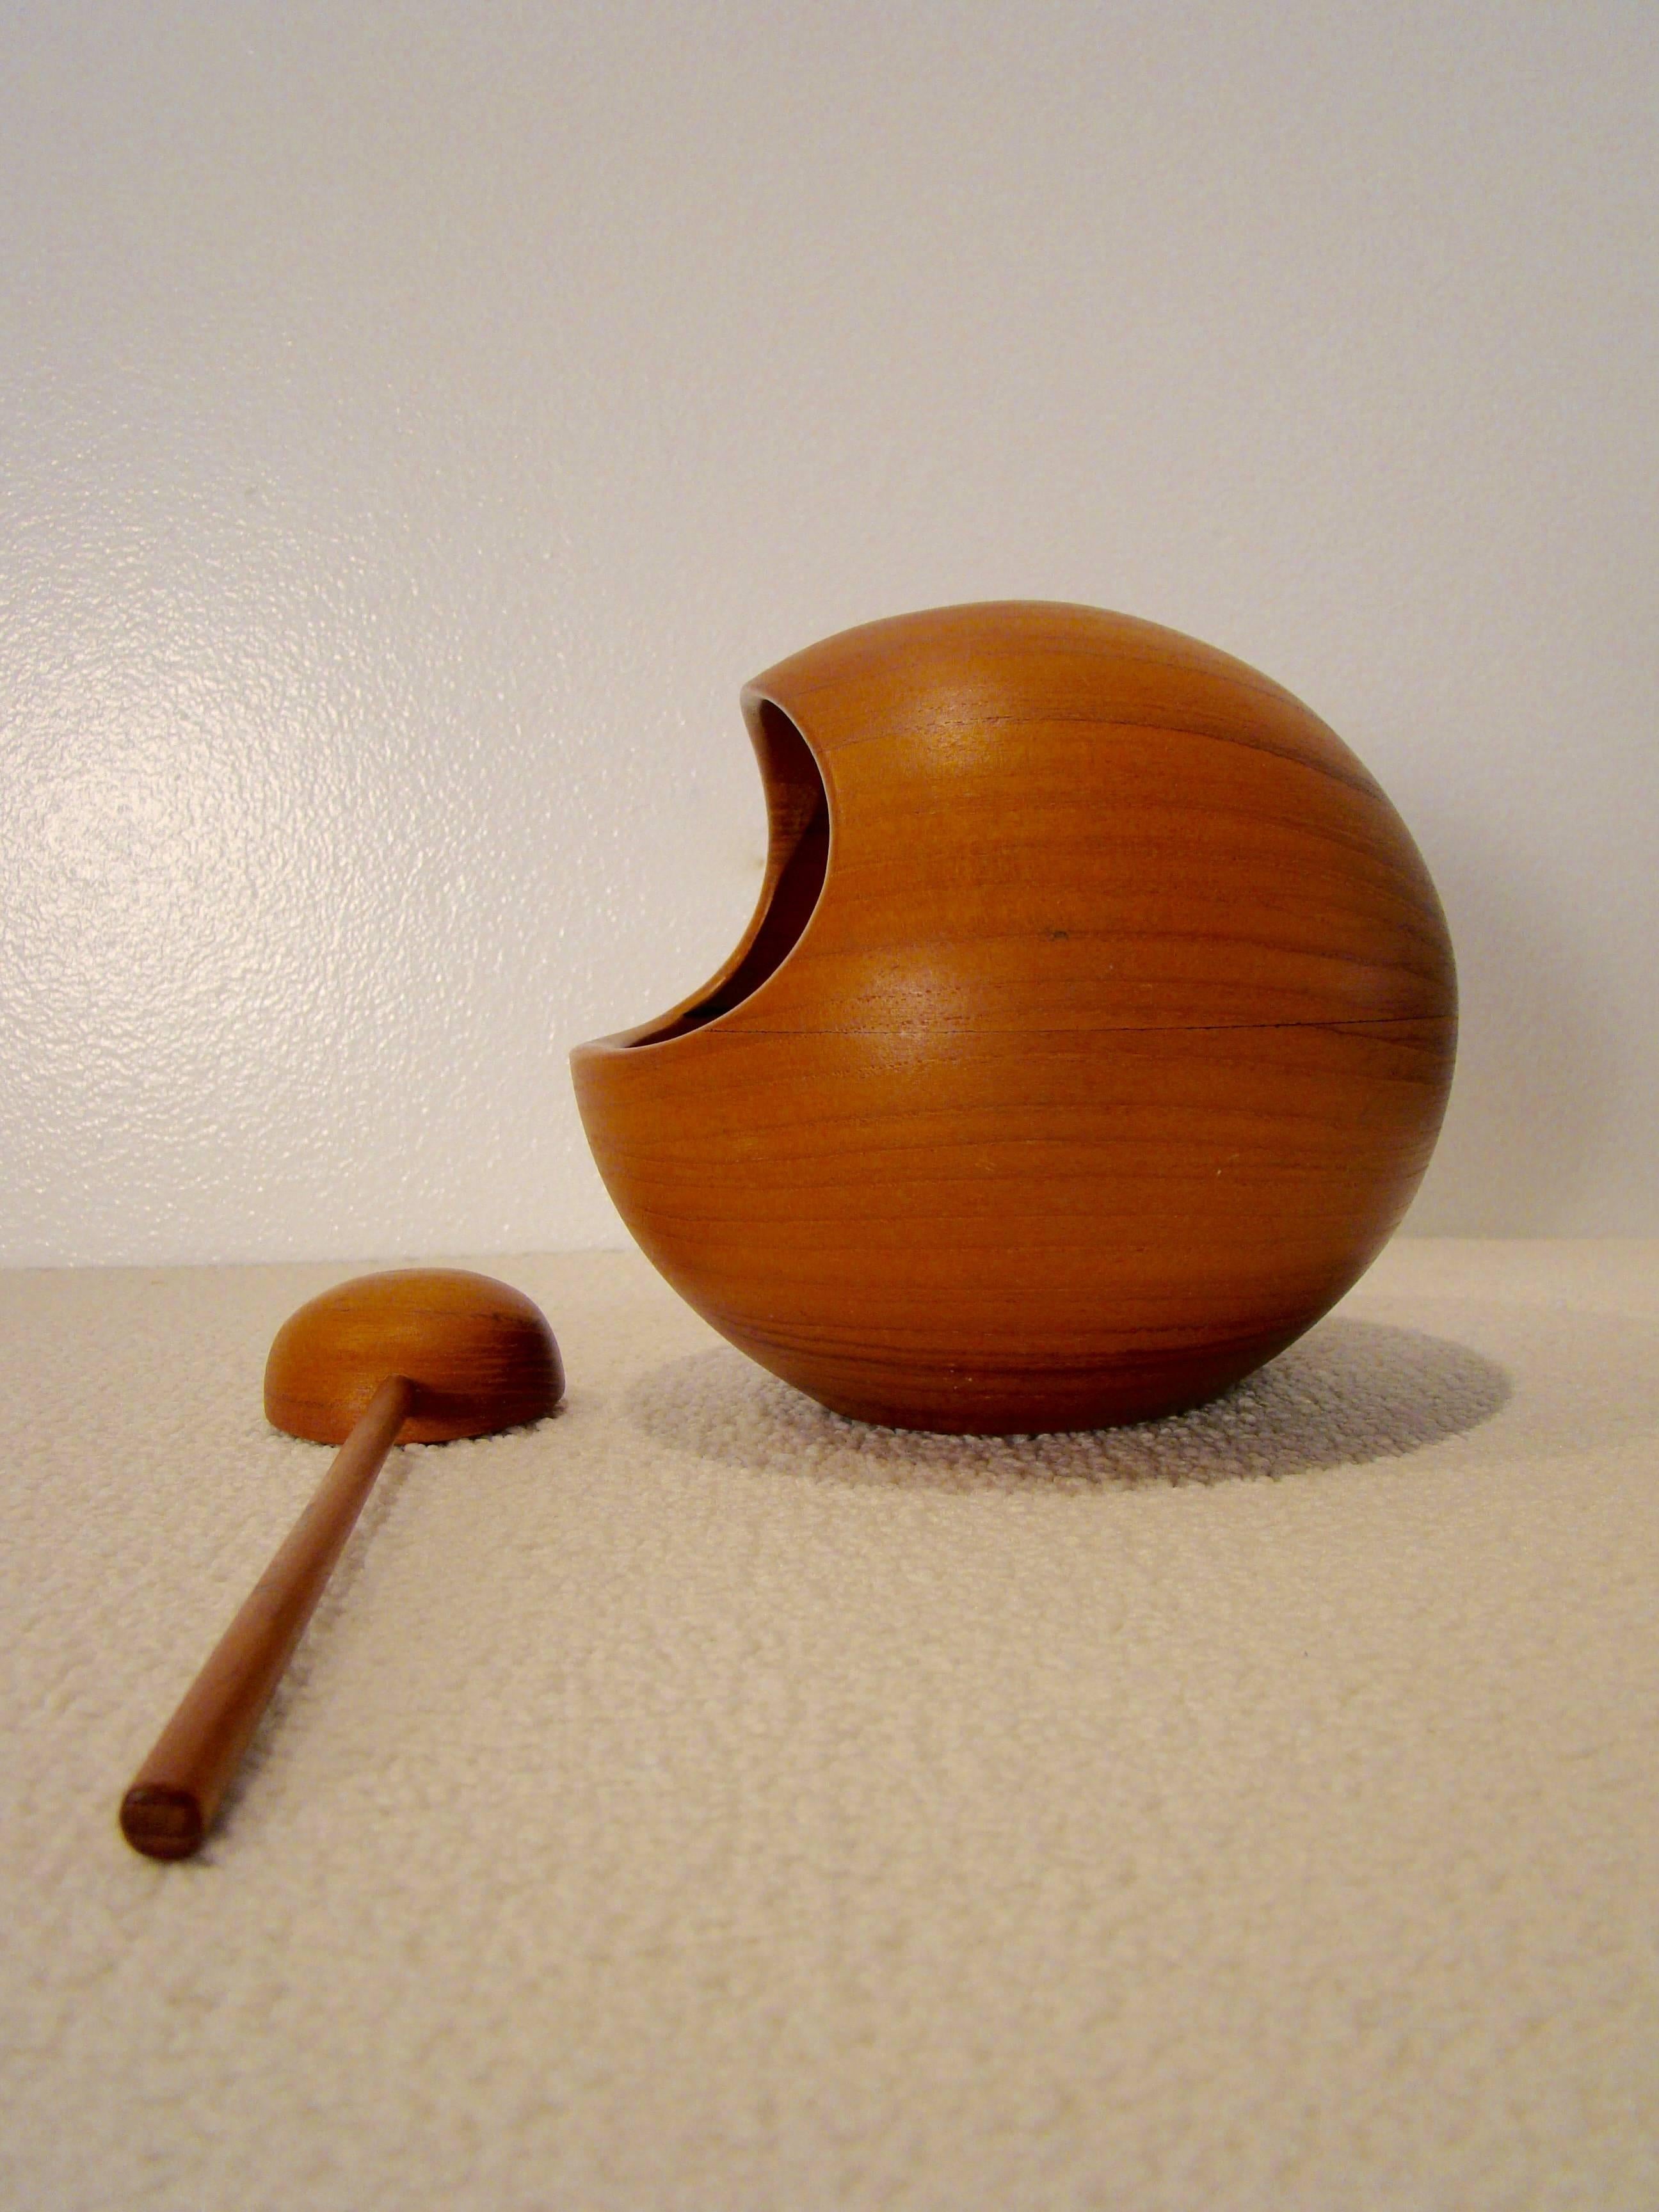 Sculptural hand-turned teak table/serving accessory represents the highest skill level (Konst) Sowe craftspeople/artisans offer. The 'nut orb' is coveted and appreciated by collectors of complex Scandinavian wood craft, furnishings and Swedish